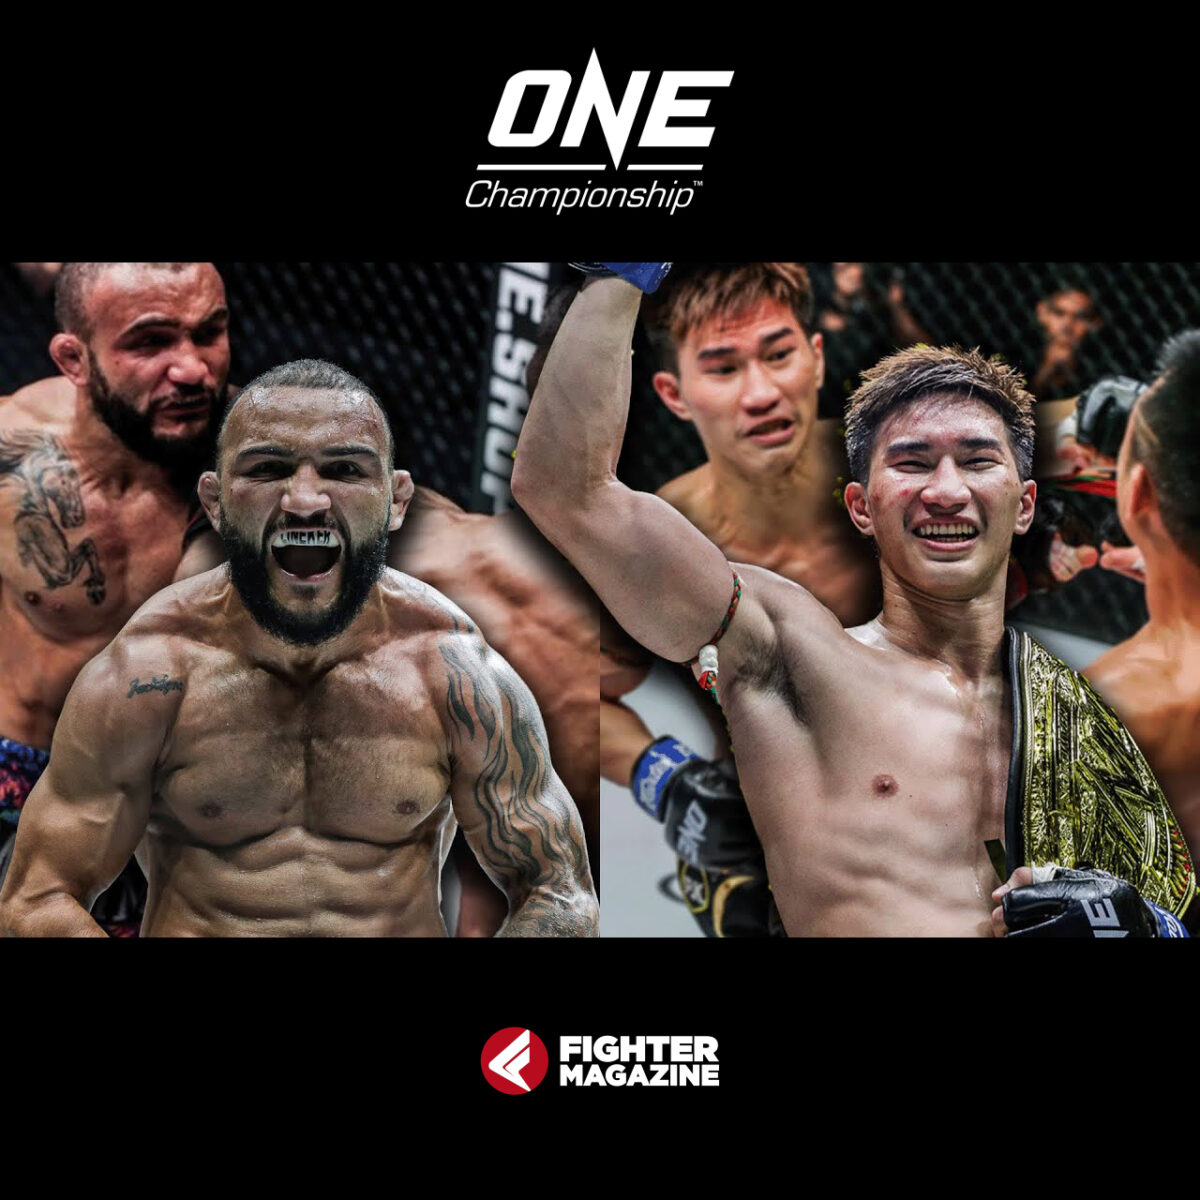 ONE Fight Night 7 Lineker vs Andrade 2 – a preview